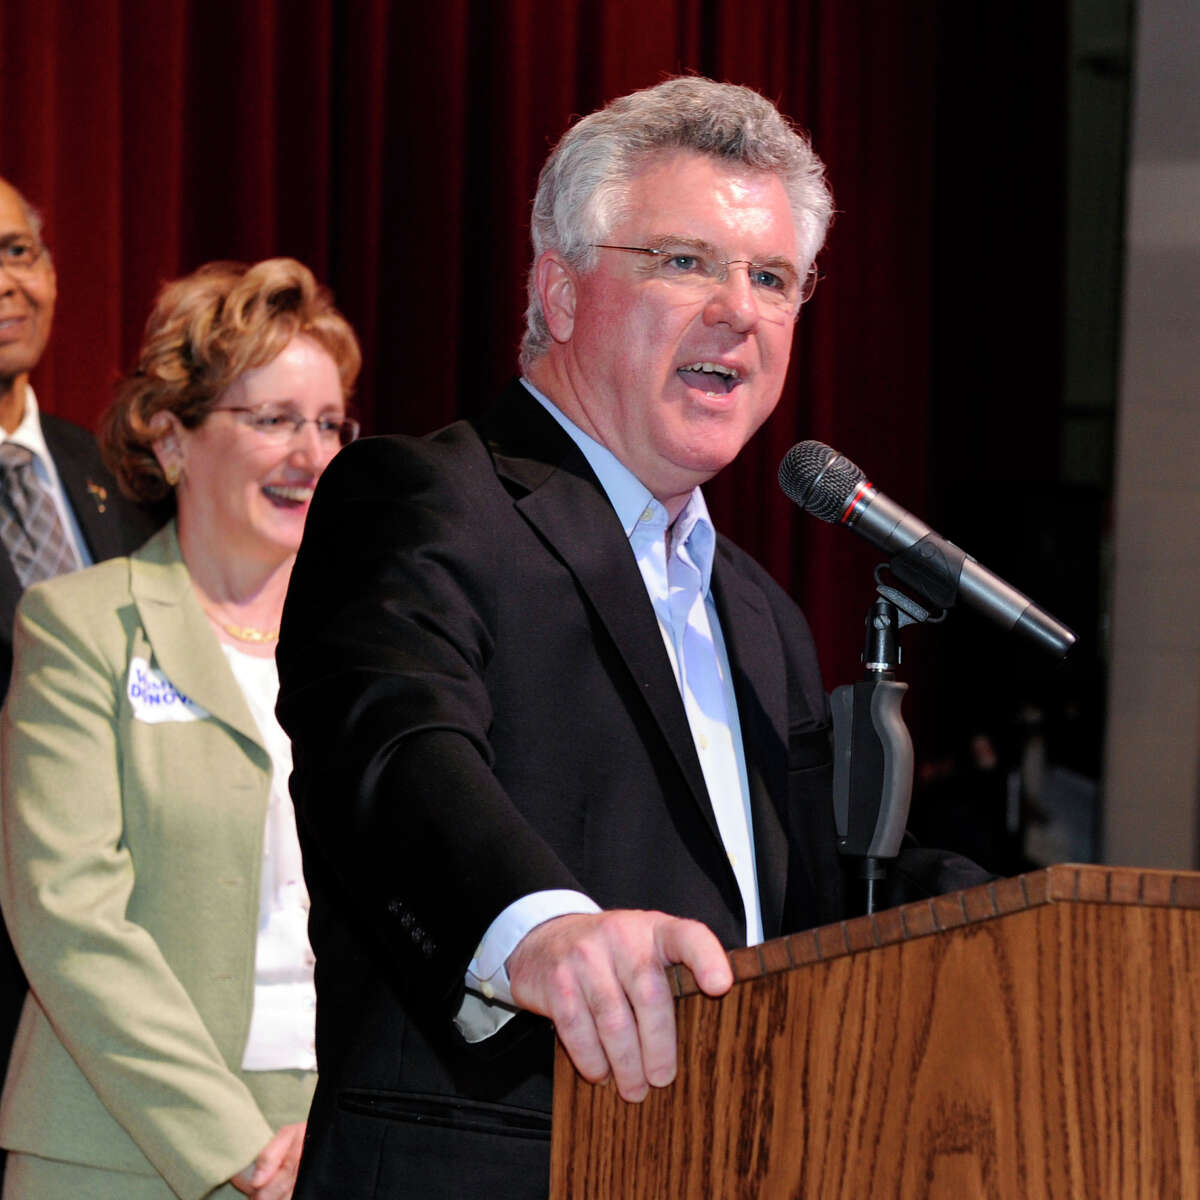 House Speaker Chris Donovan, with wife Niki, left, accepts the Democratic nomination for congress in the 5th congressional district Monday night in Waterbury, Ct., May 14, 2012.